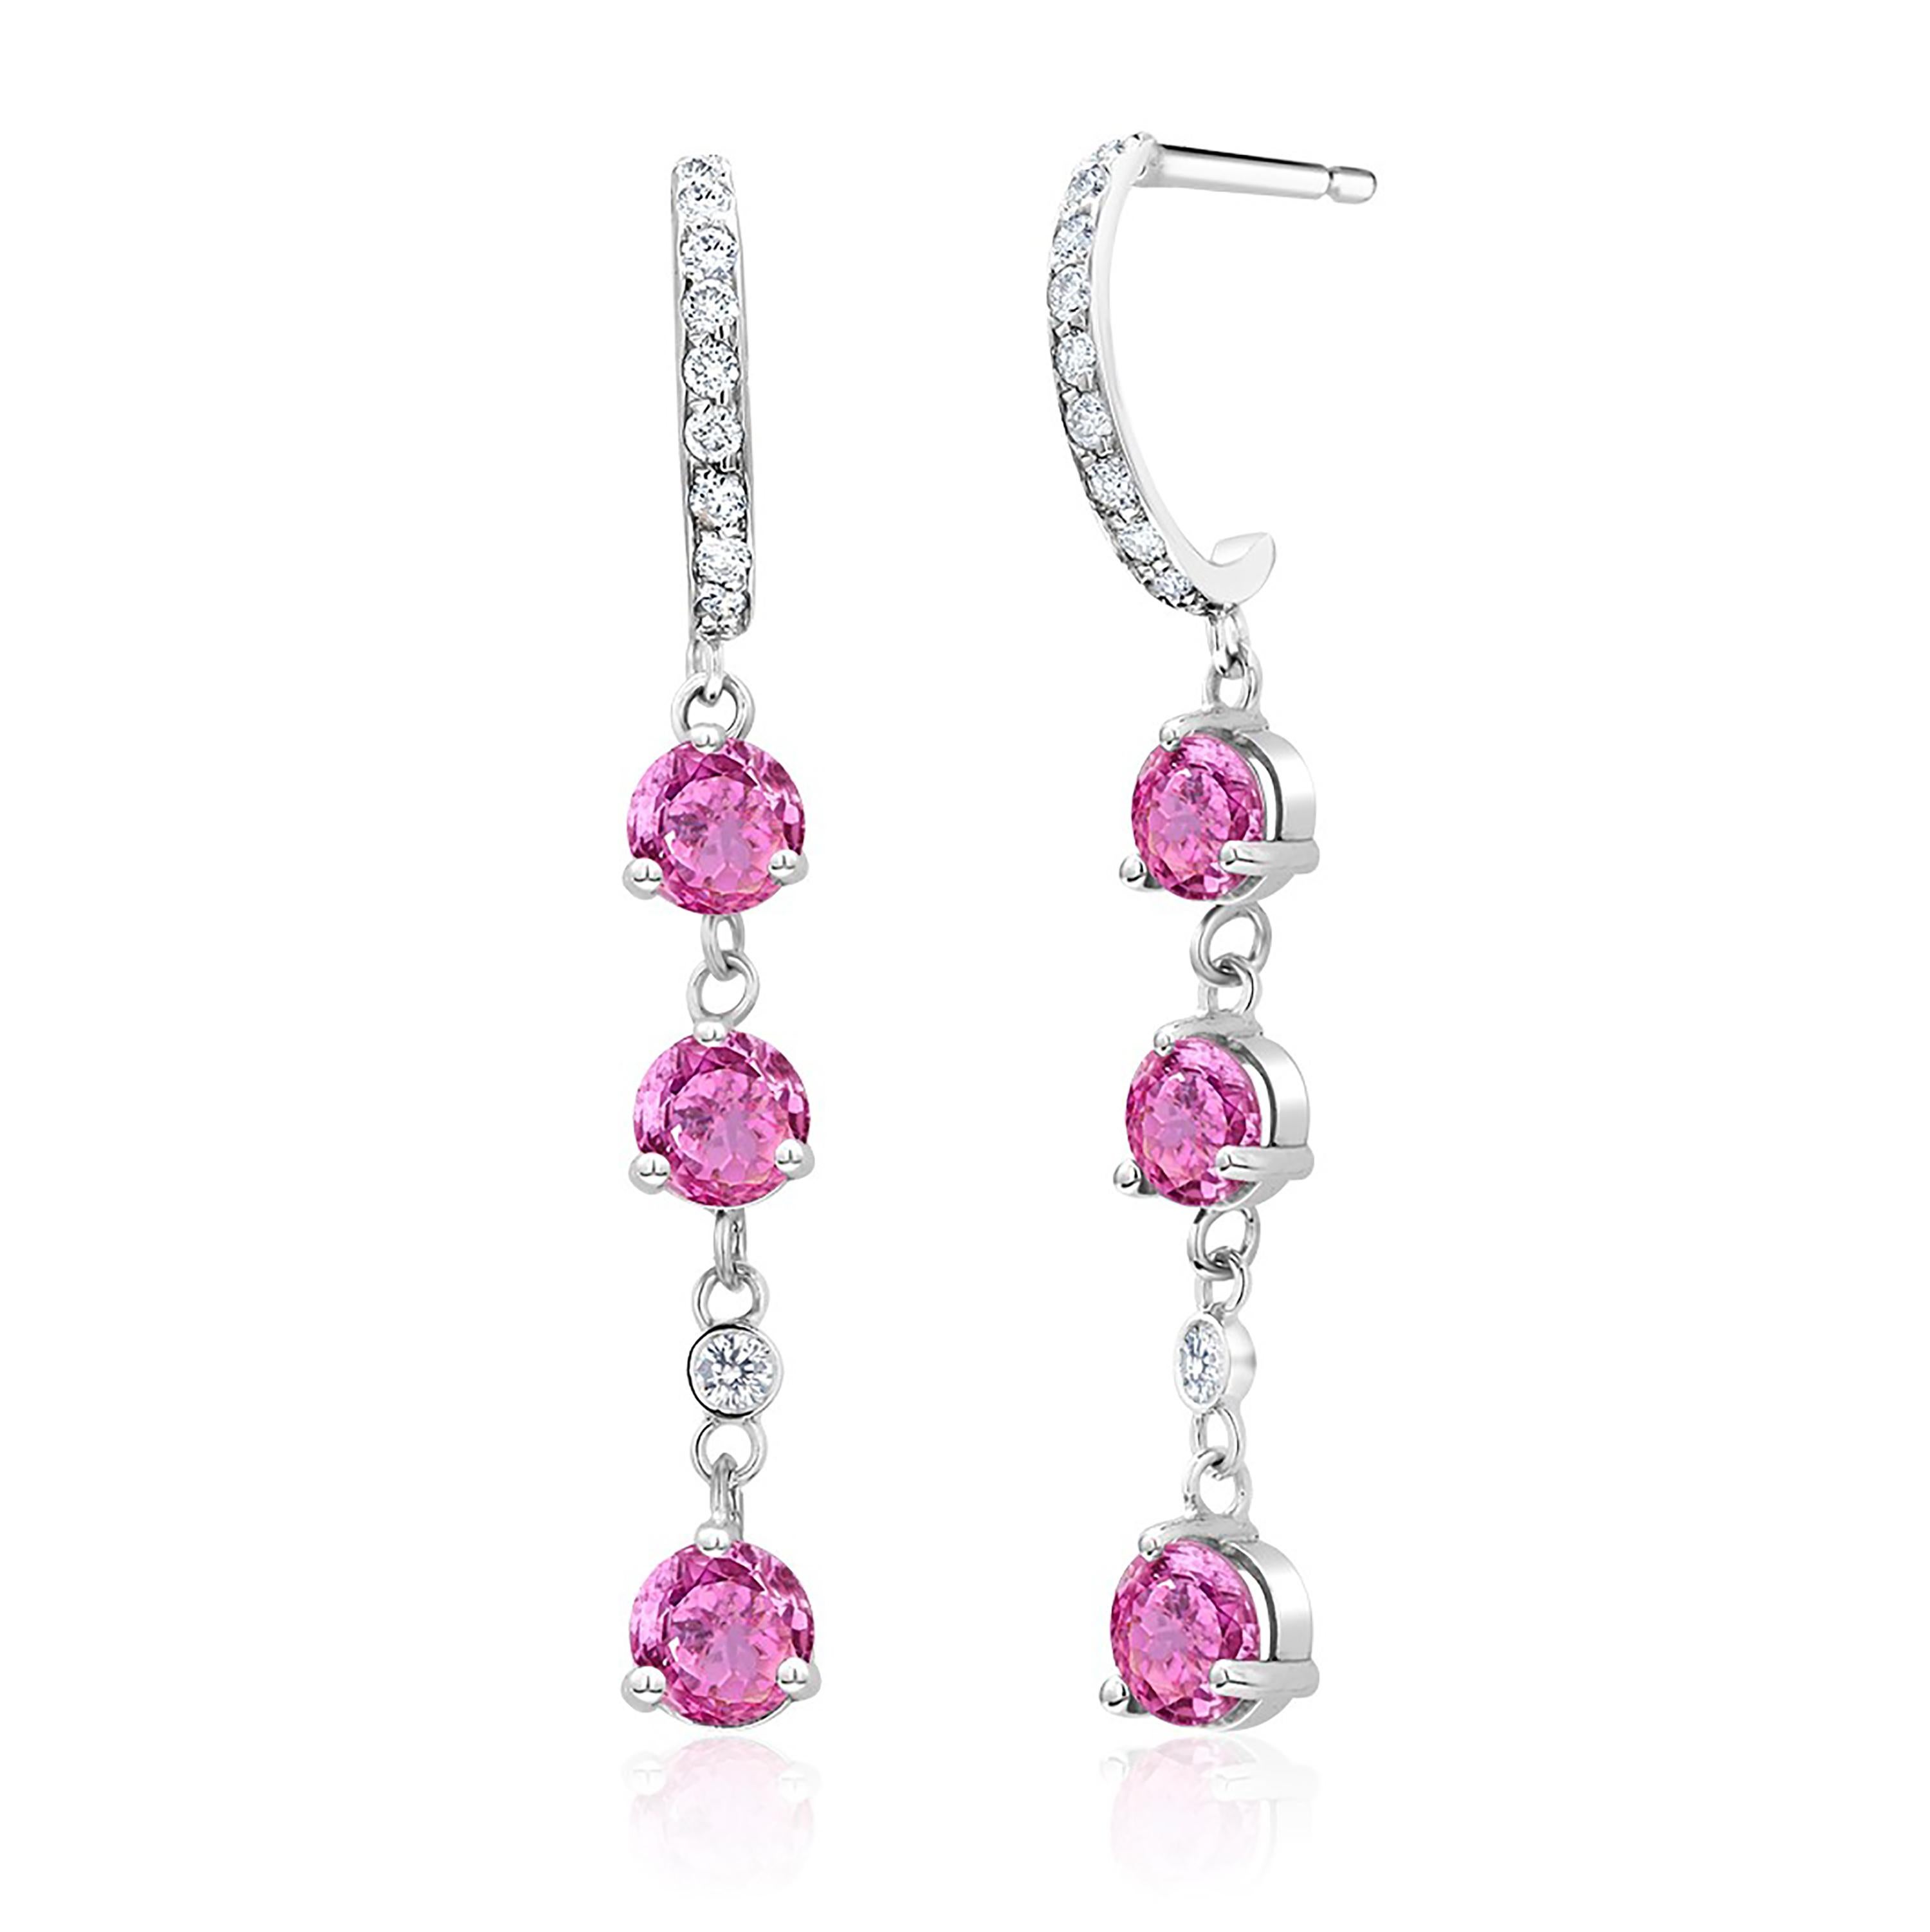 Round Cut Six Round Pink Ceylon Sapphires and Diamond White Gold Hoop Drop Earrings